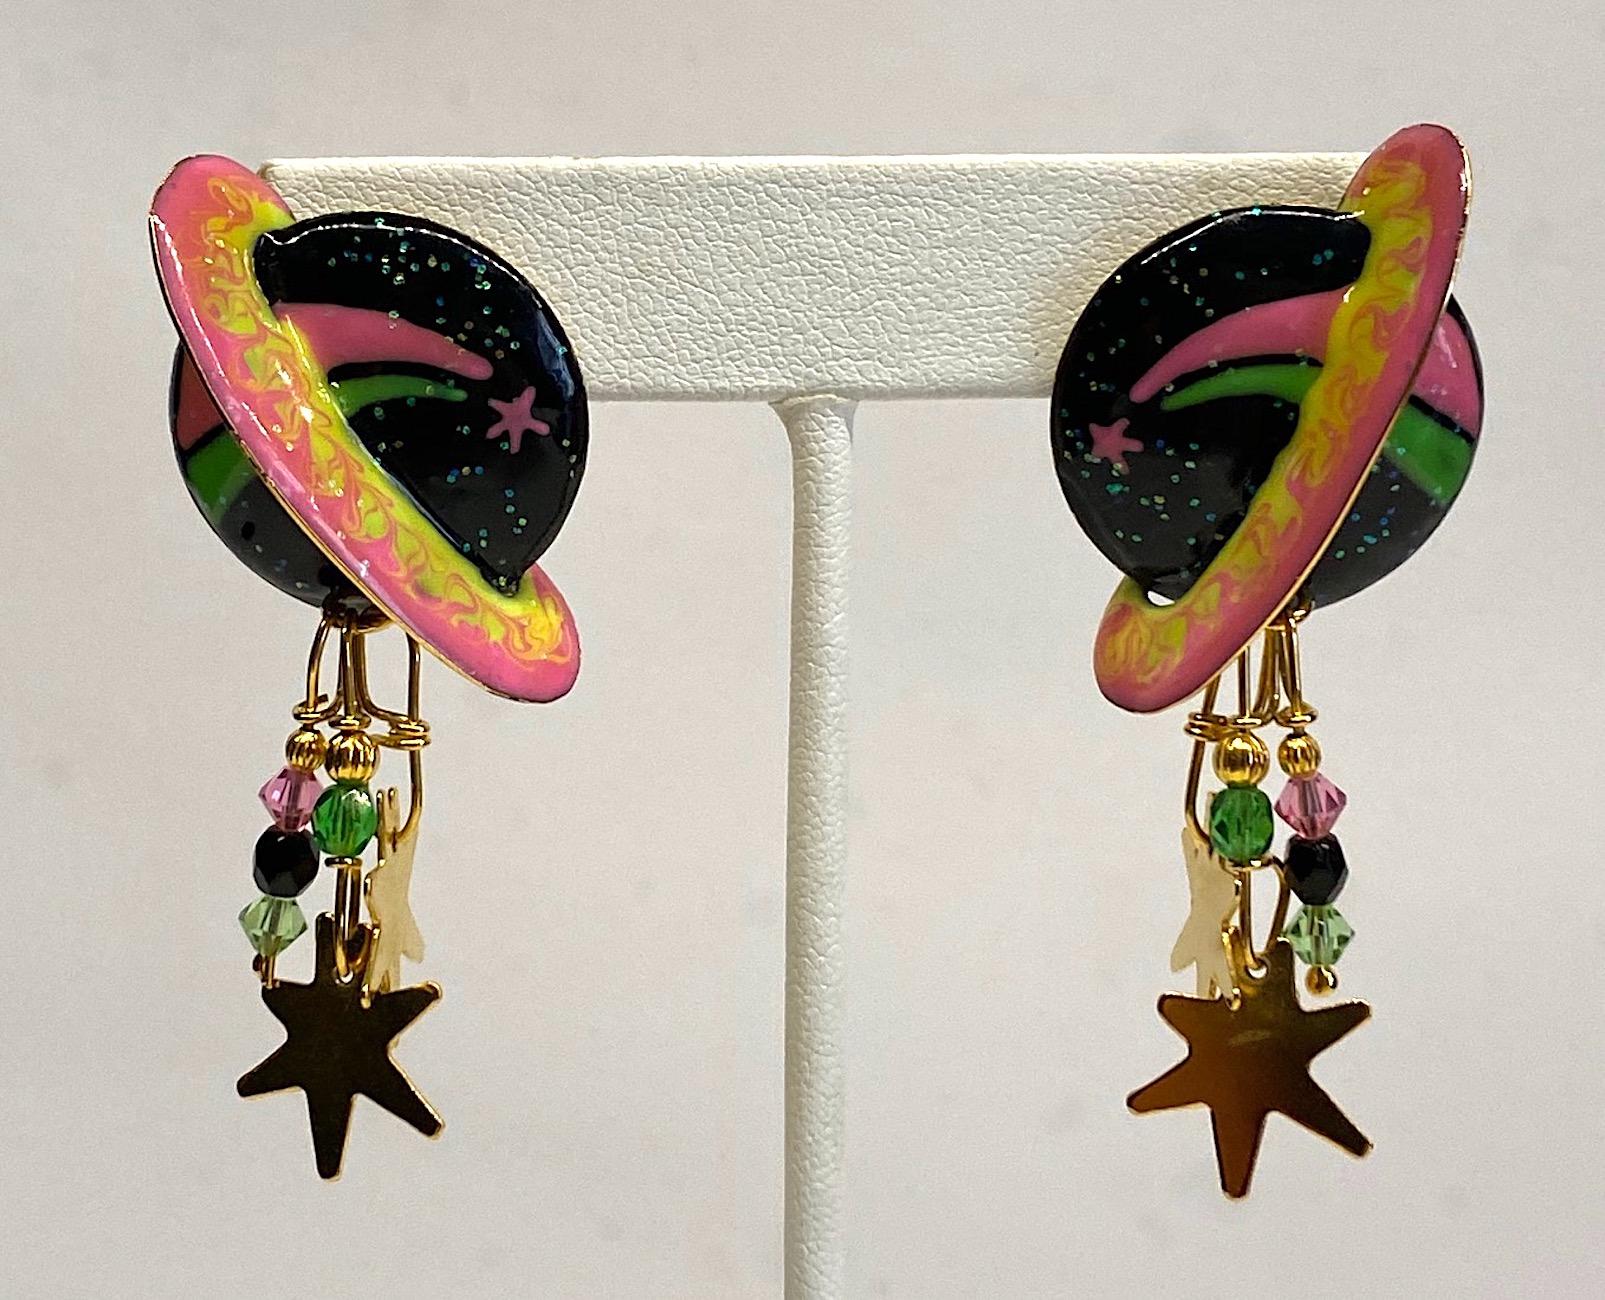 Lunch at The Ritz Enameled Planet Saturn Earrings 2